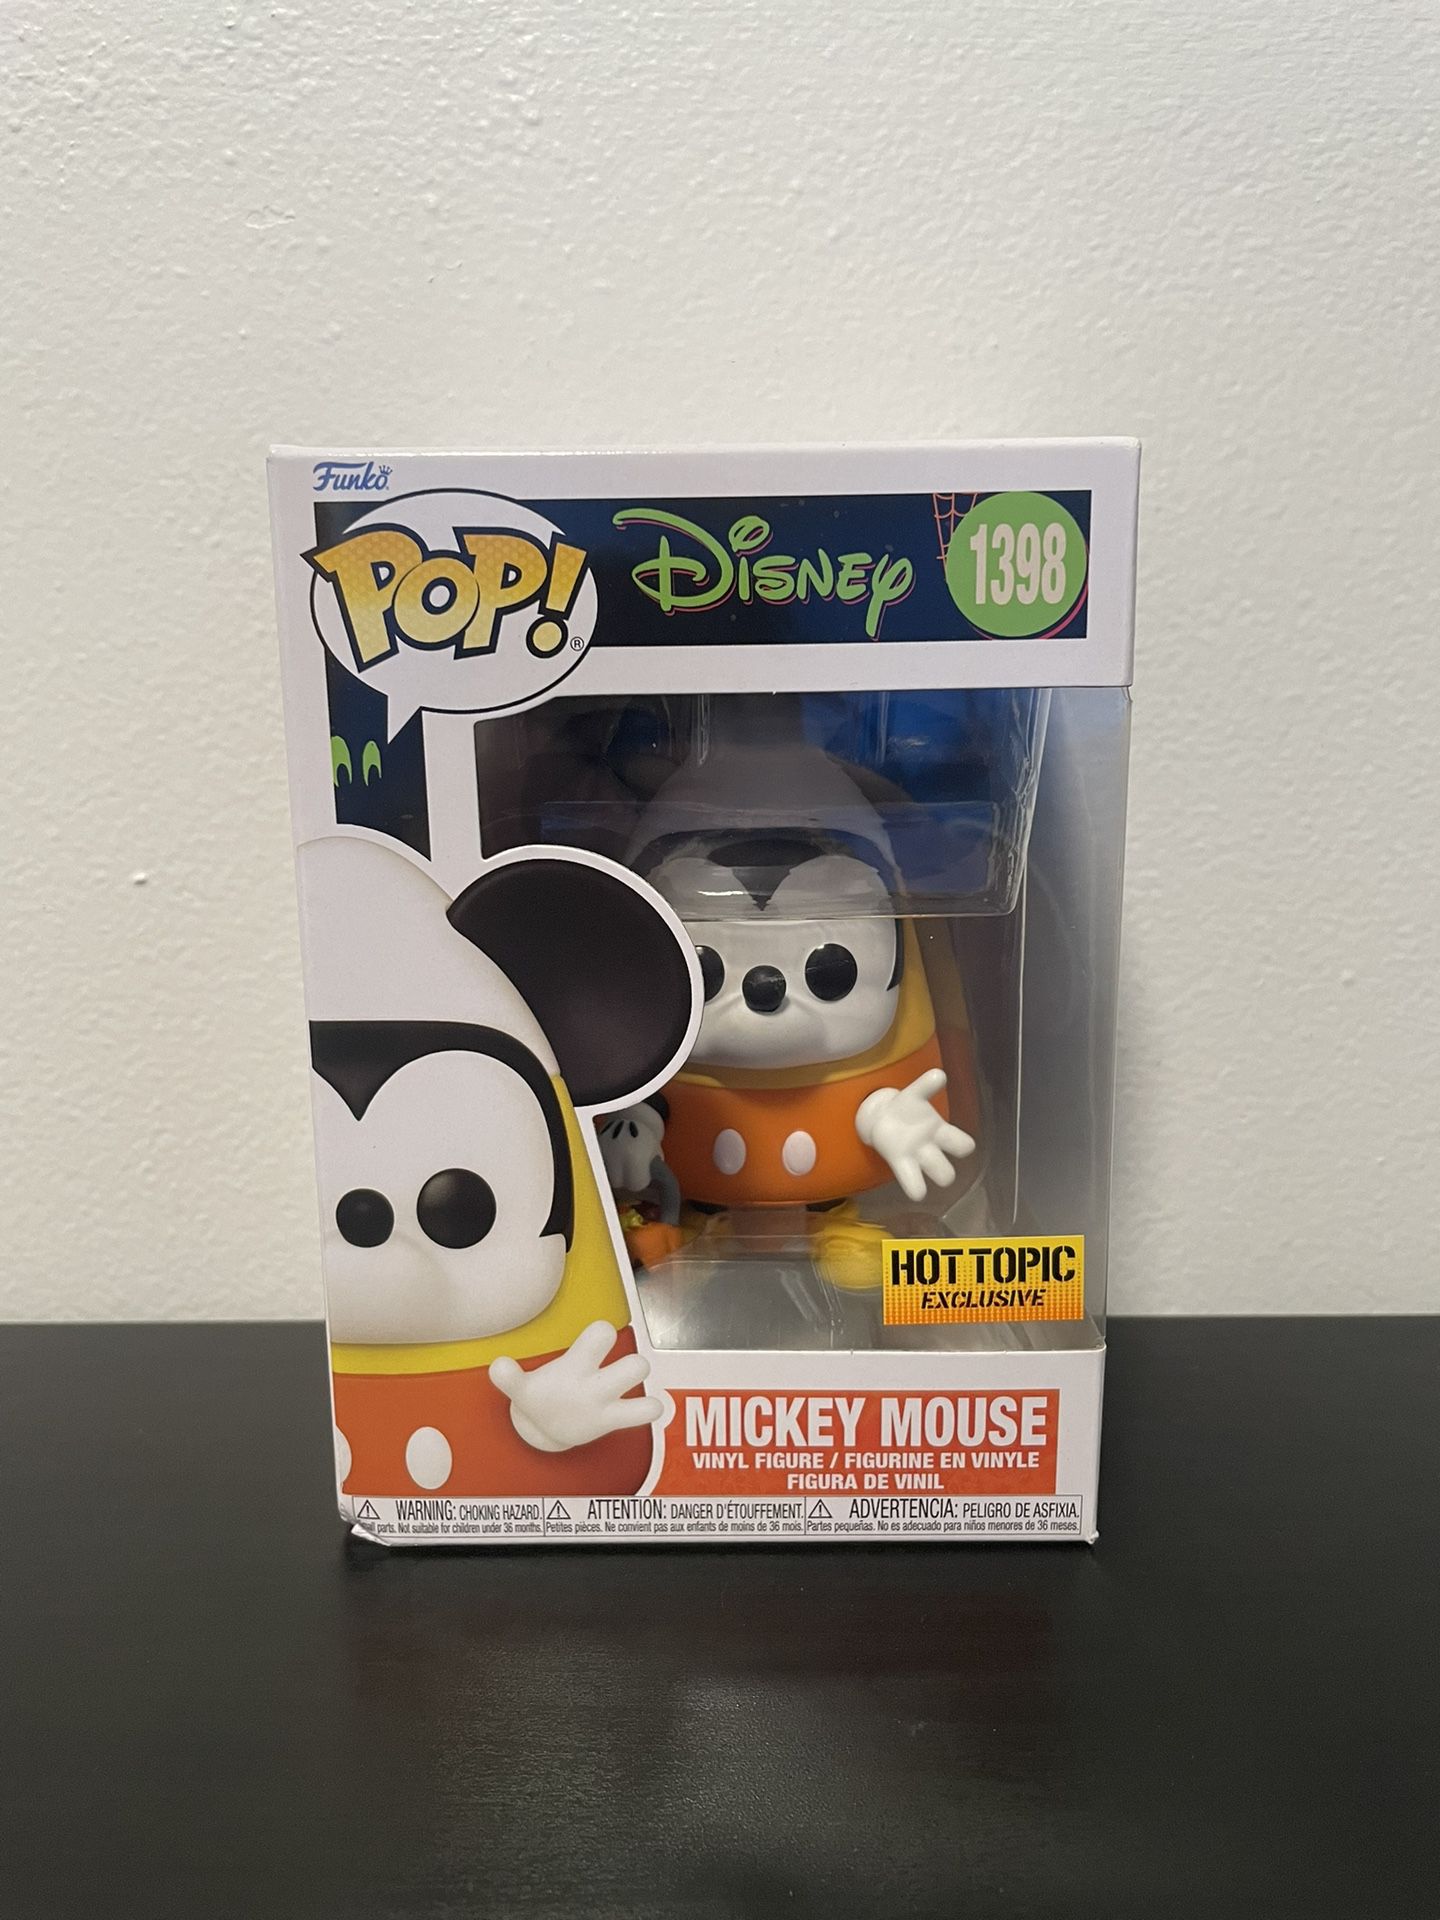 Funko Pop! Disney Halloween Mickey Mouse #1398 - NEW - Trick Or Treat Hot Topic